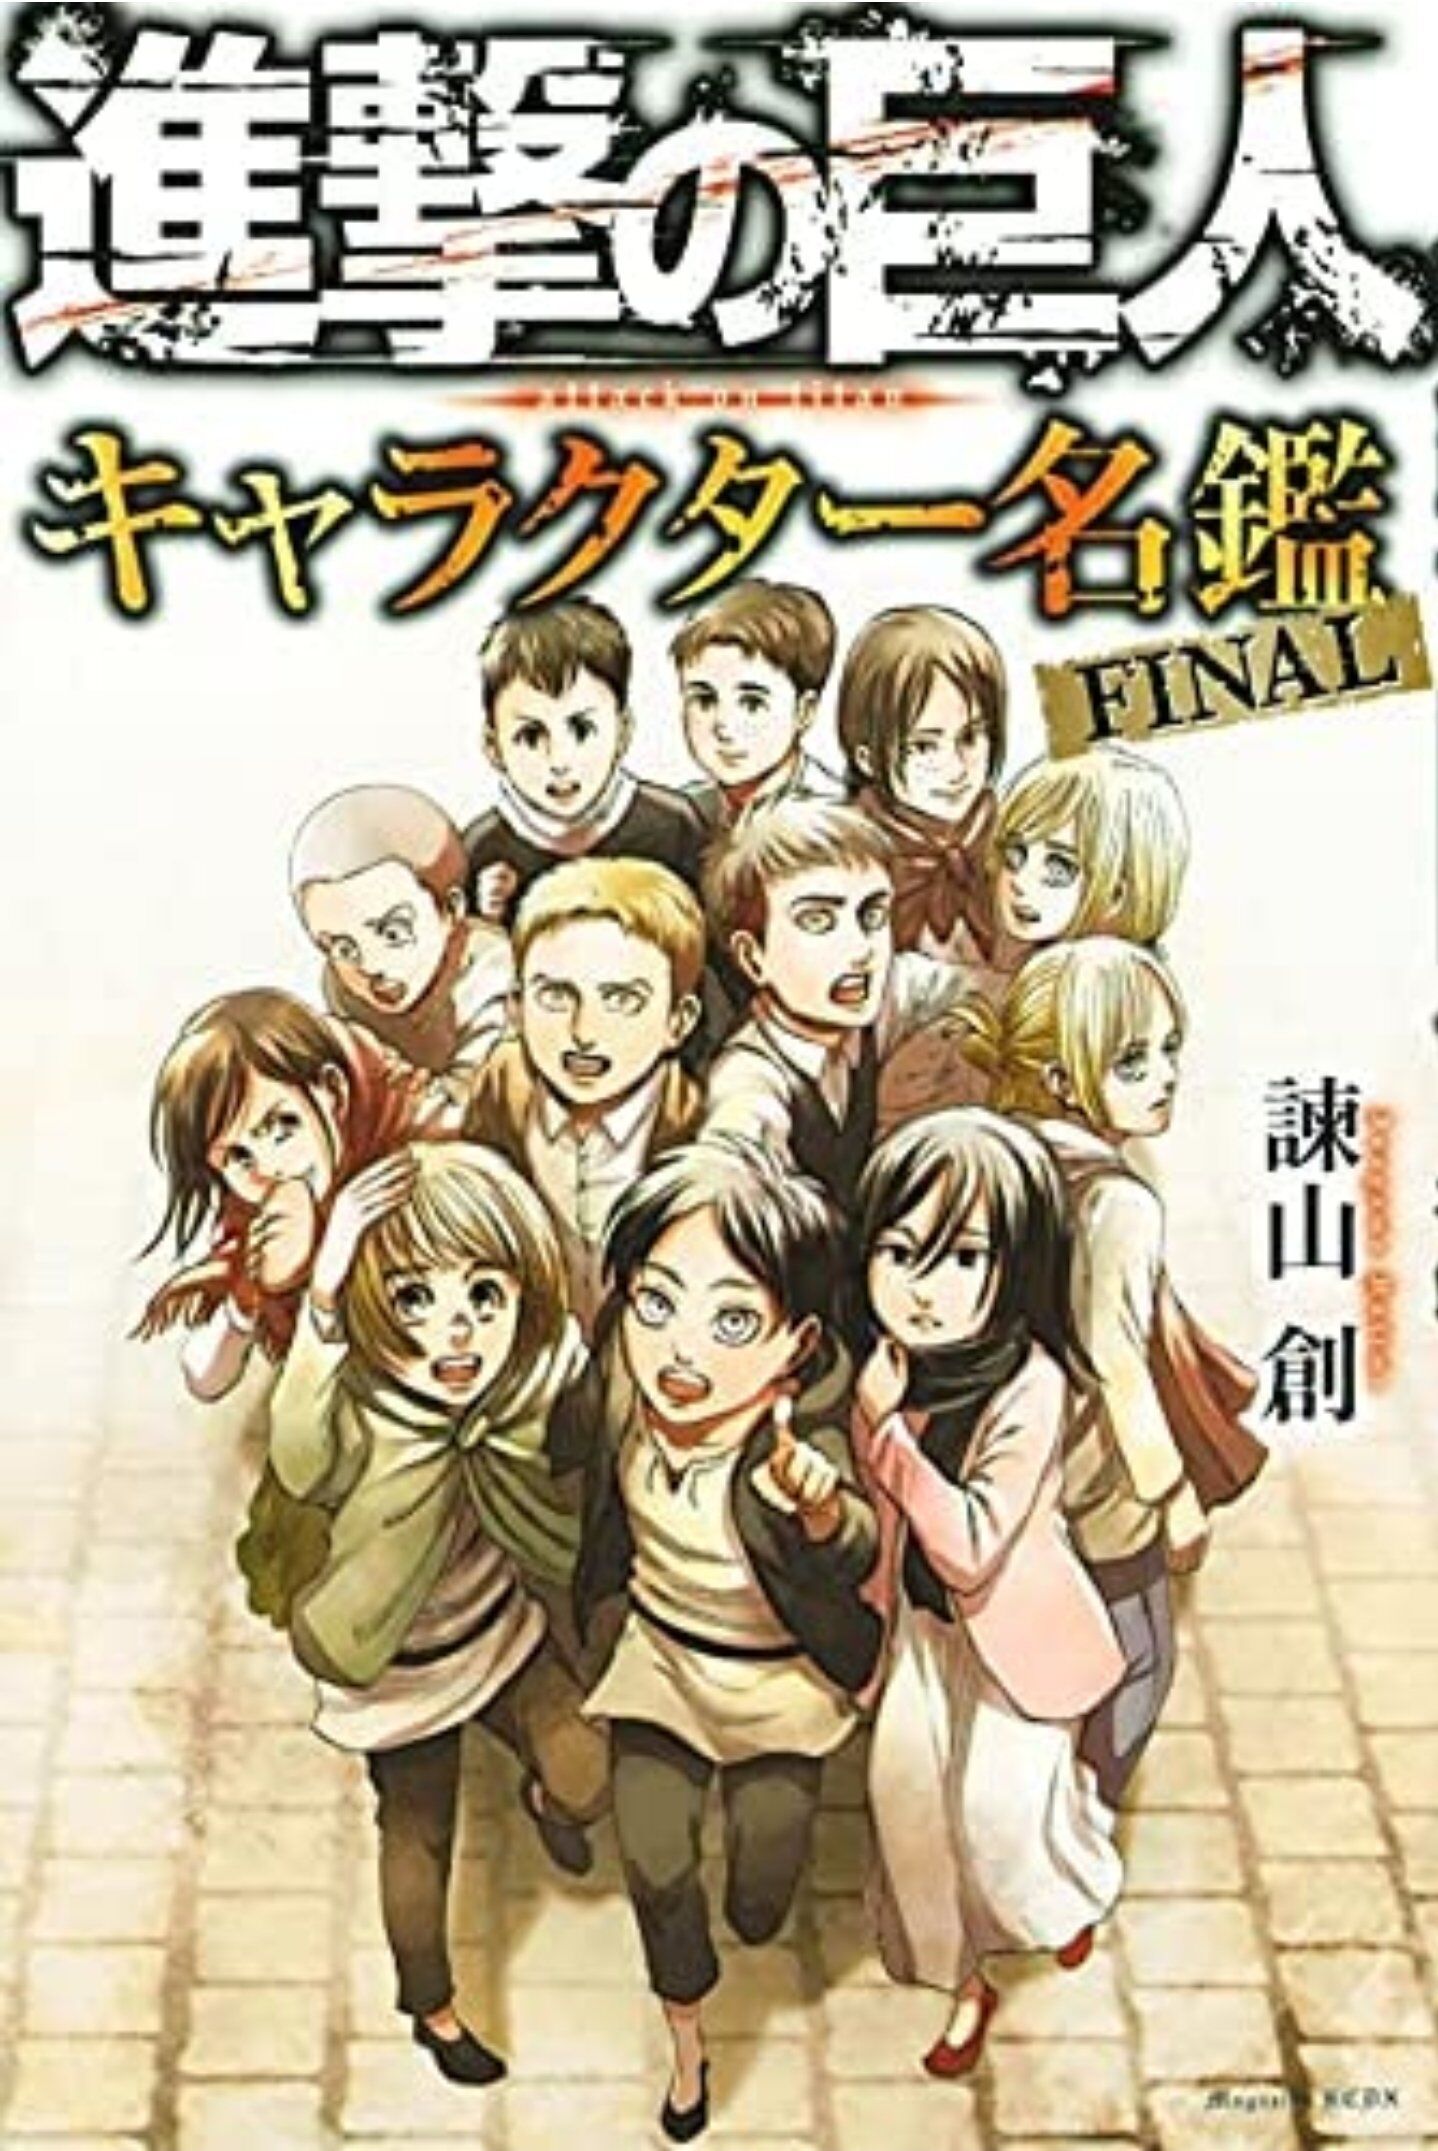 (BOOK) ATTACK ON TITAN CHARACTER GUIDE BOOKFINAL